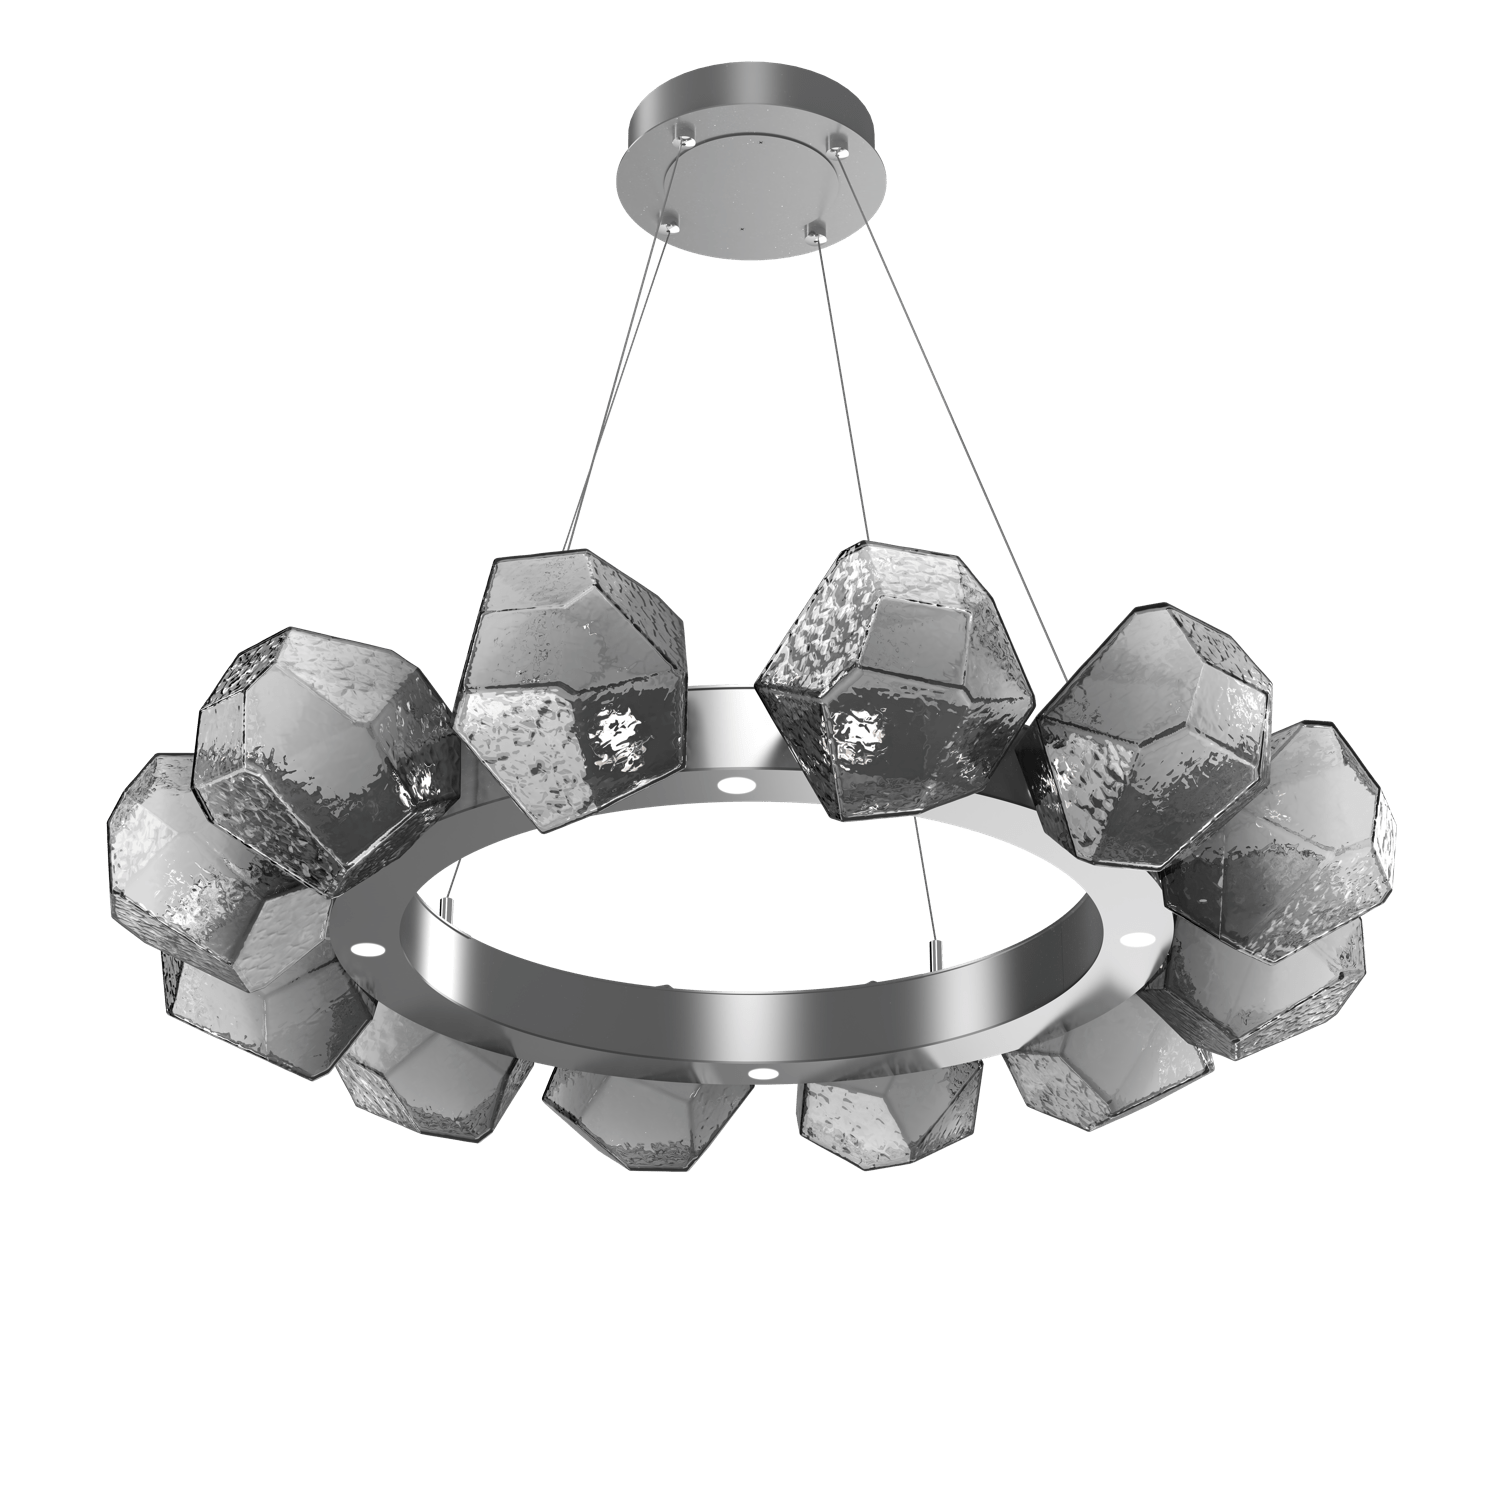 CHB0039-36-CS-S-Hammerton-Studio-Gem-36-inch-radial-ring-chandelier-with-classic-silver-finish-and-smoke-blown-glass-shades-and-LED-lamping